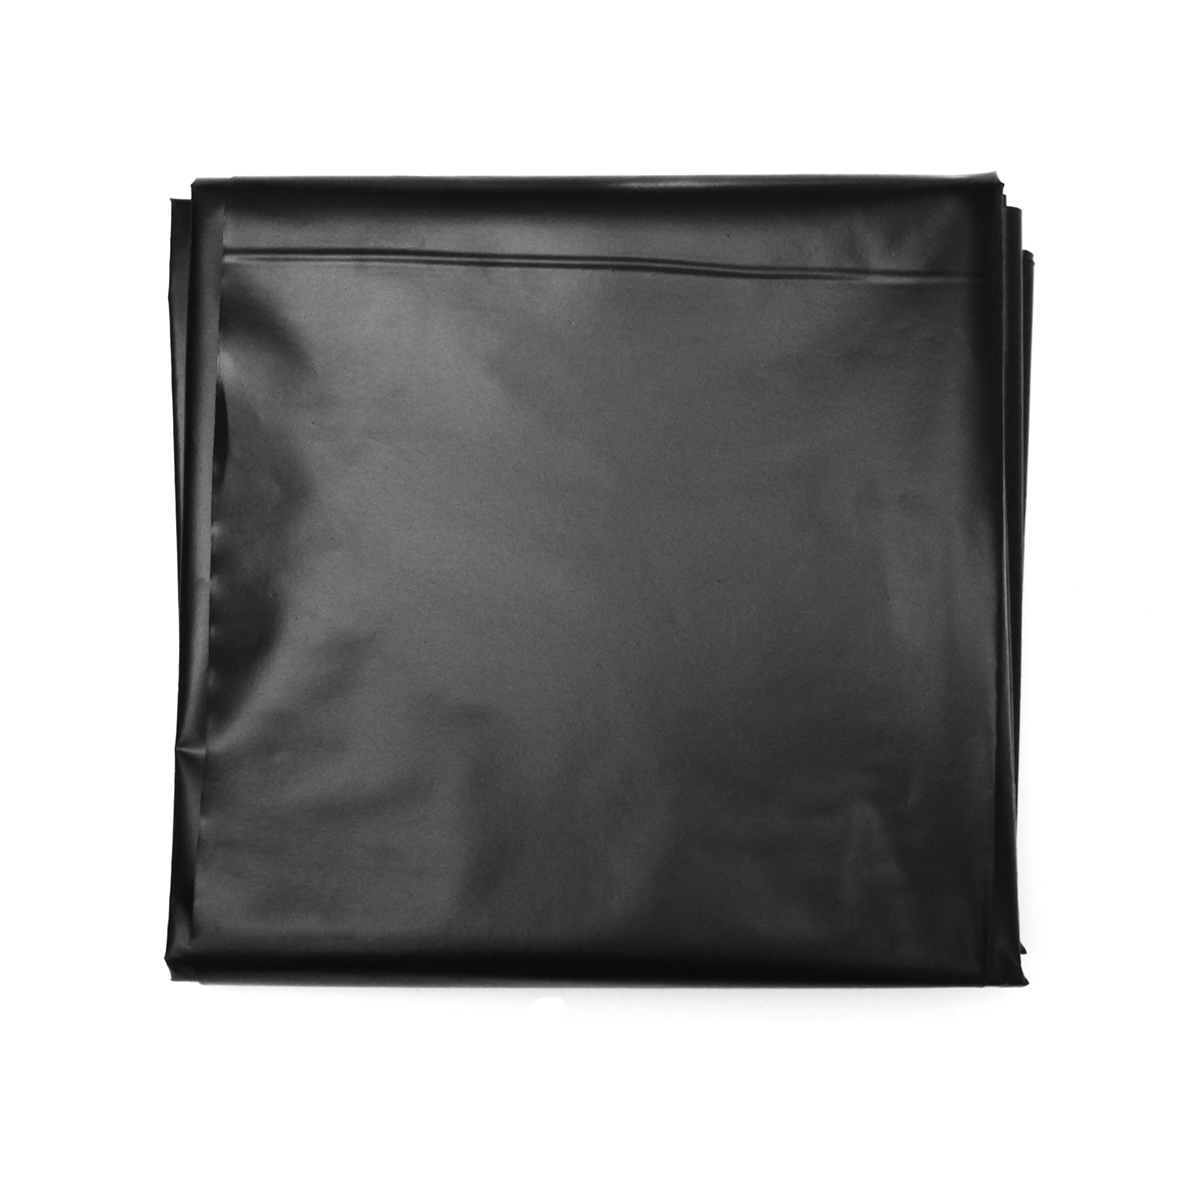 Find 10x10ft Fish Pool Pond Liner Membrane Culture Film For Composite Geomembrane Sewage Treatment Anti seepage Geomembrane for Sale on Gipsybee.com with cryptocurrencies